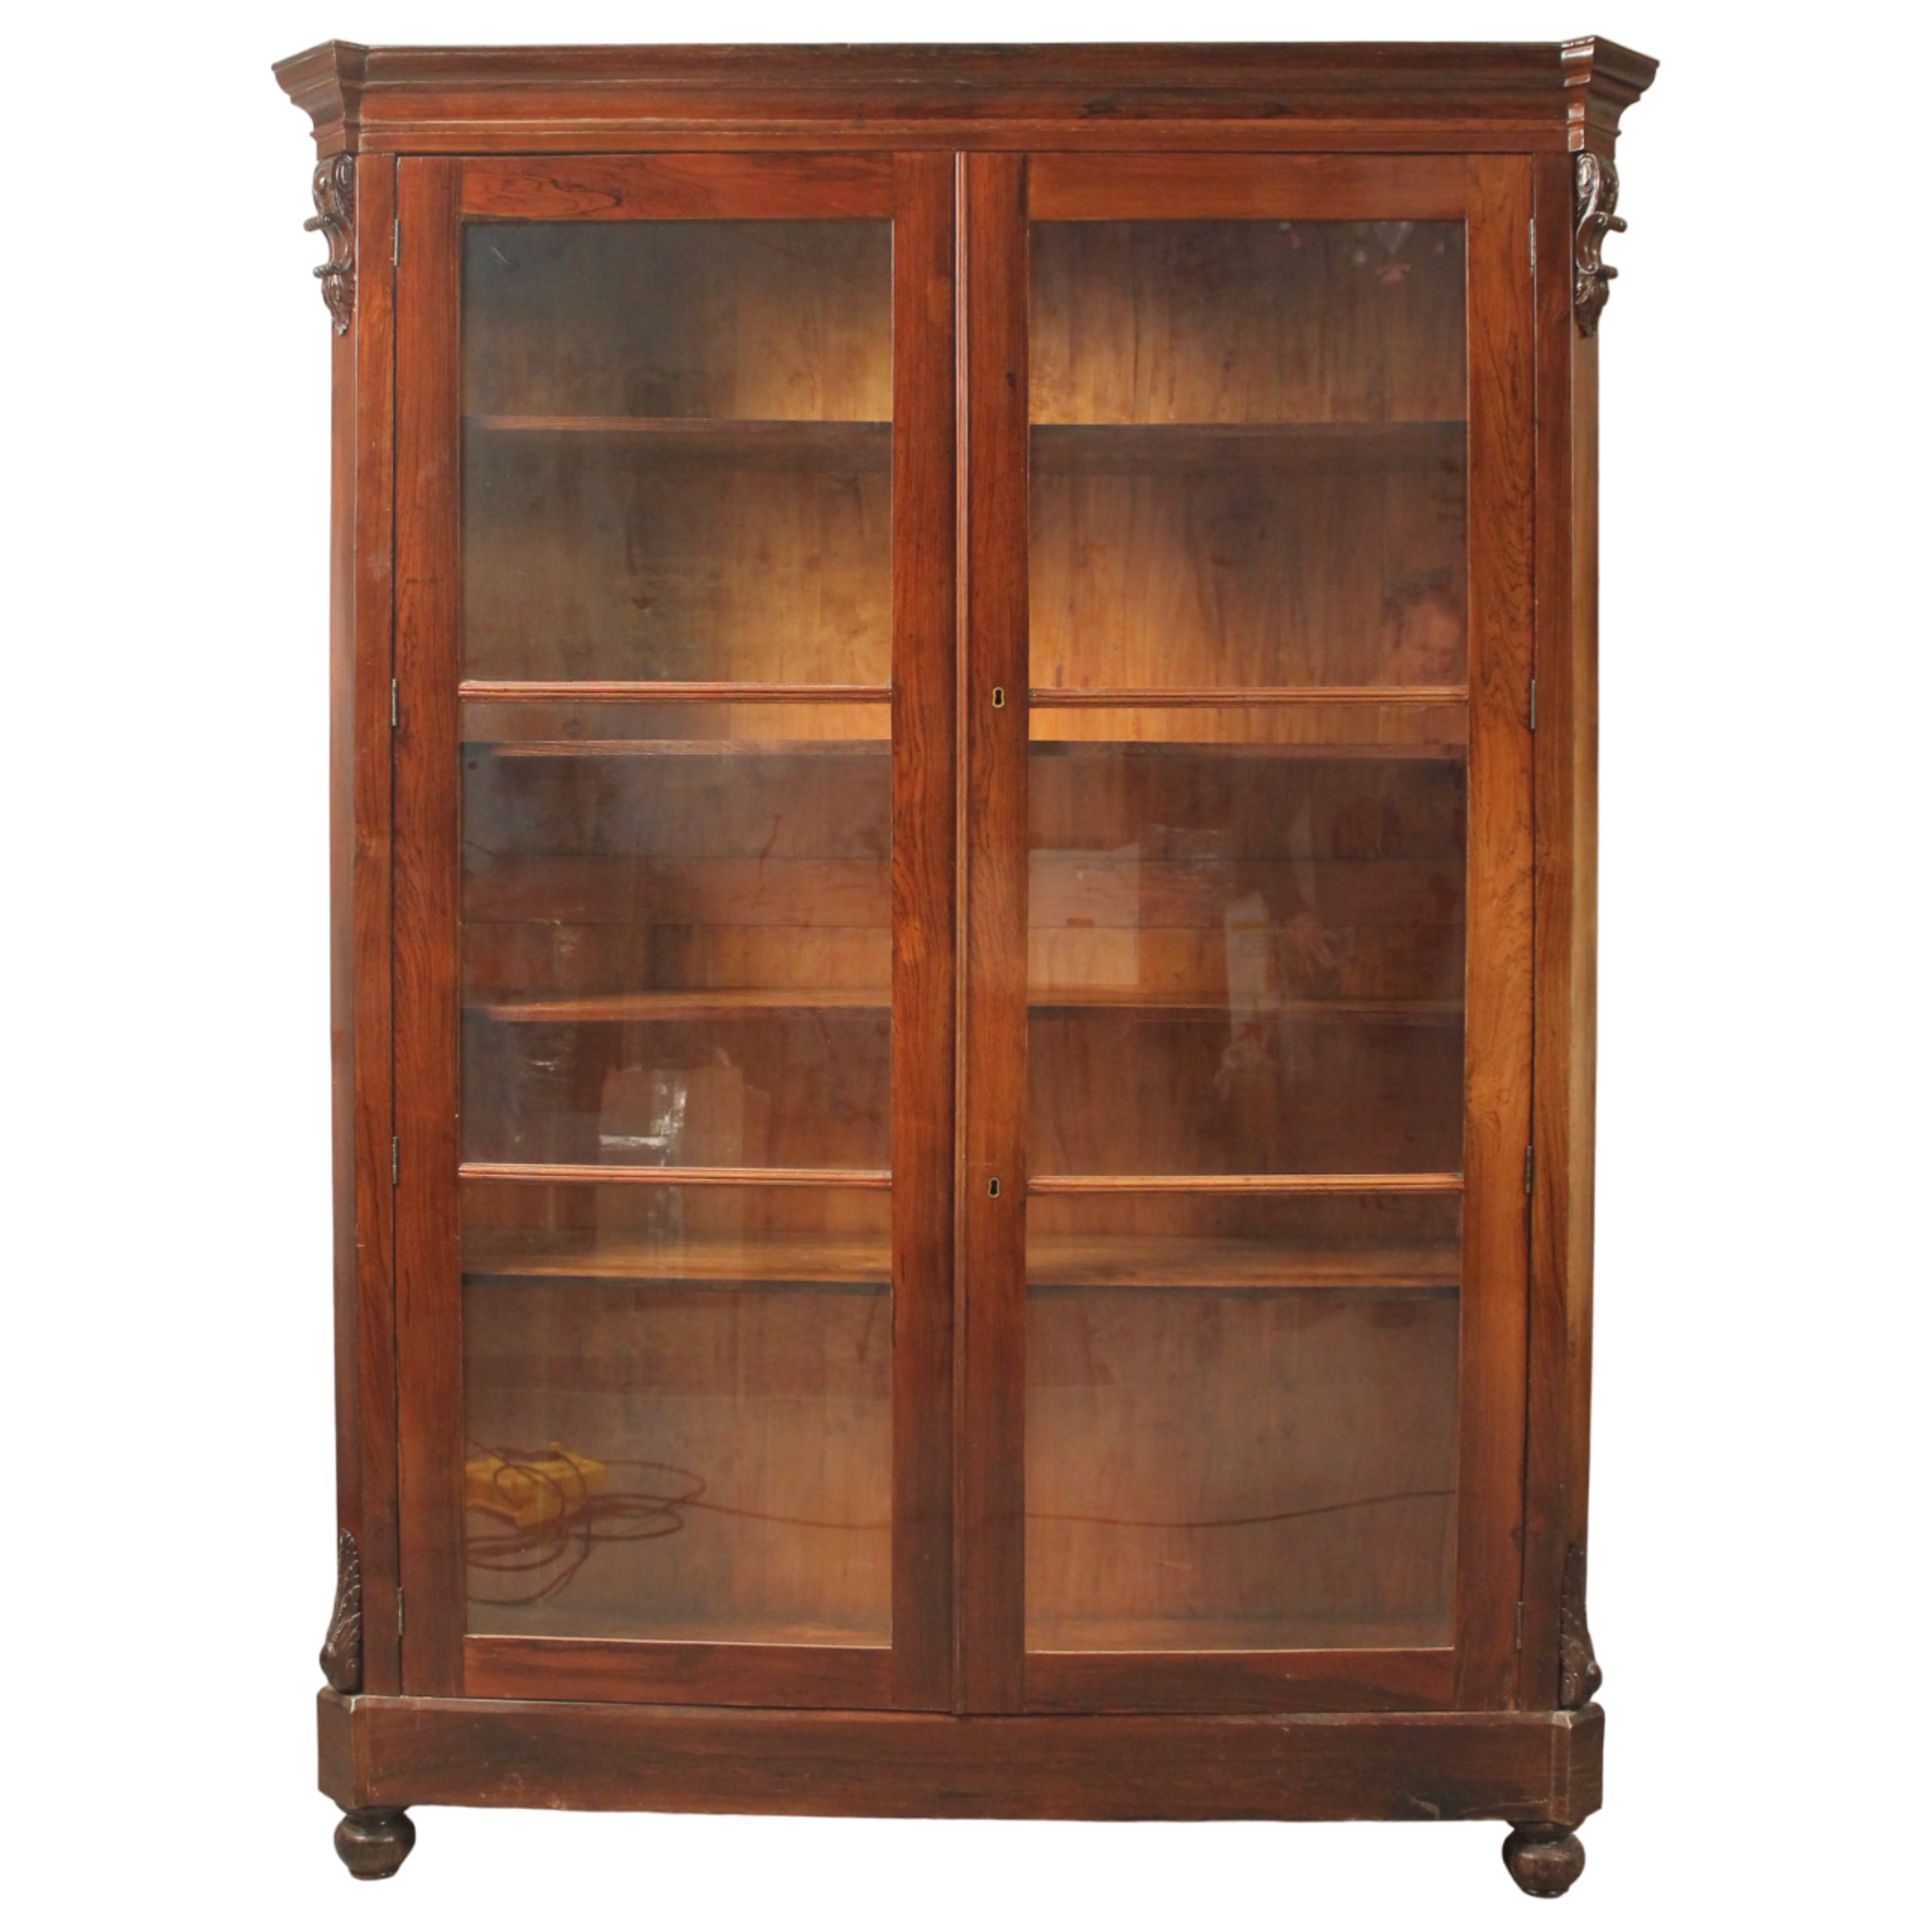 Coppia librerie a due ante - Pair of bookcases with two doors - Image 2 of 2